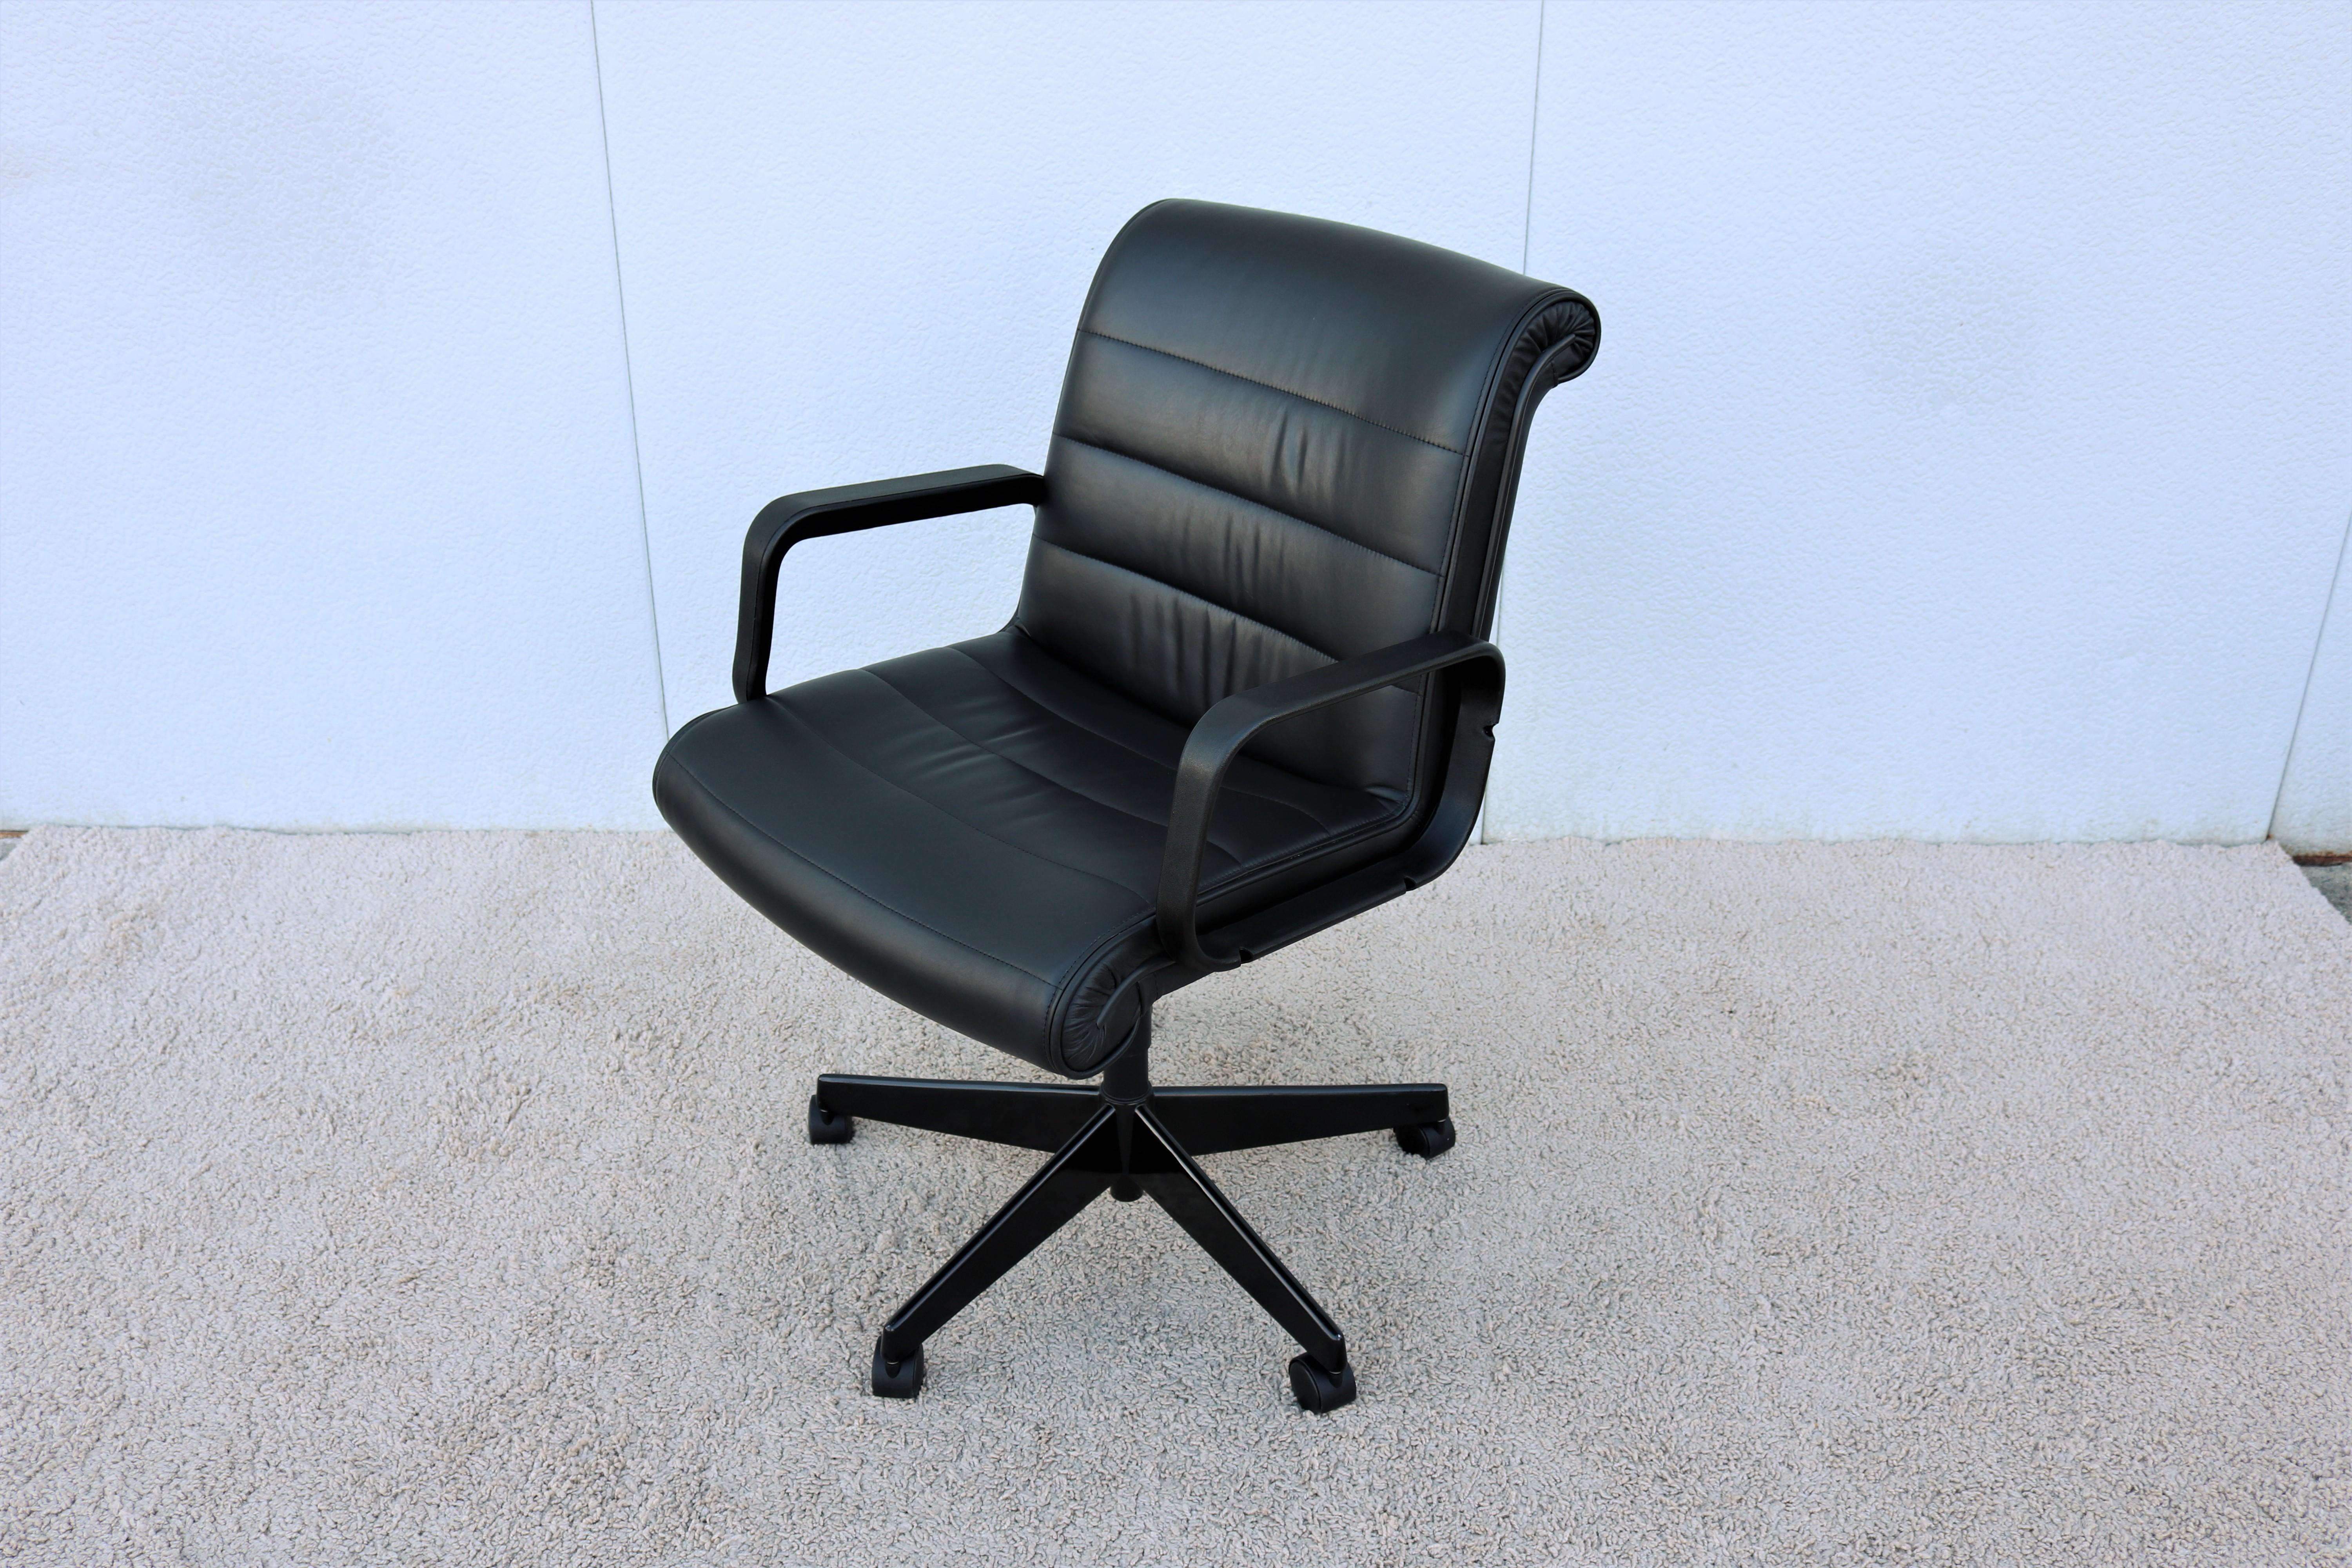 The classic Sapper Management Chair for Knoll was introduced in 1979 by the German acclaimed industrial designer Richard Sapper.
Ergonomic and very Comfortable design, the chair frame is generously proportioned with wide flat seating.
The design